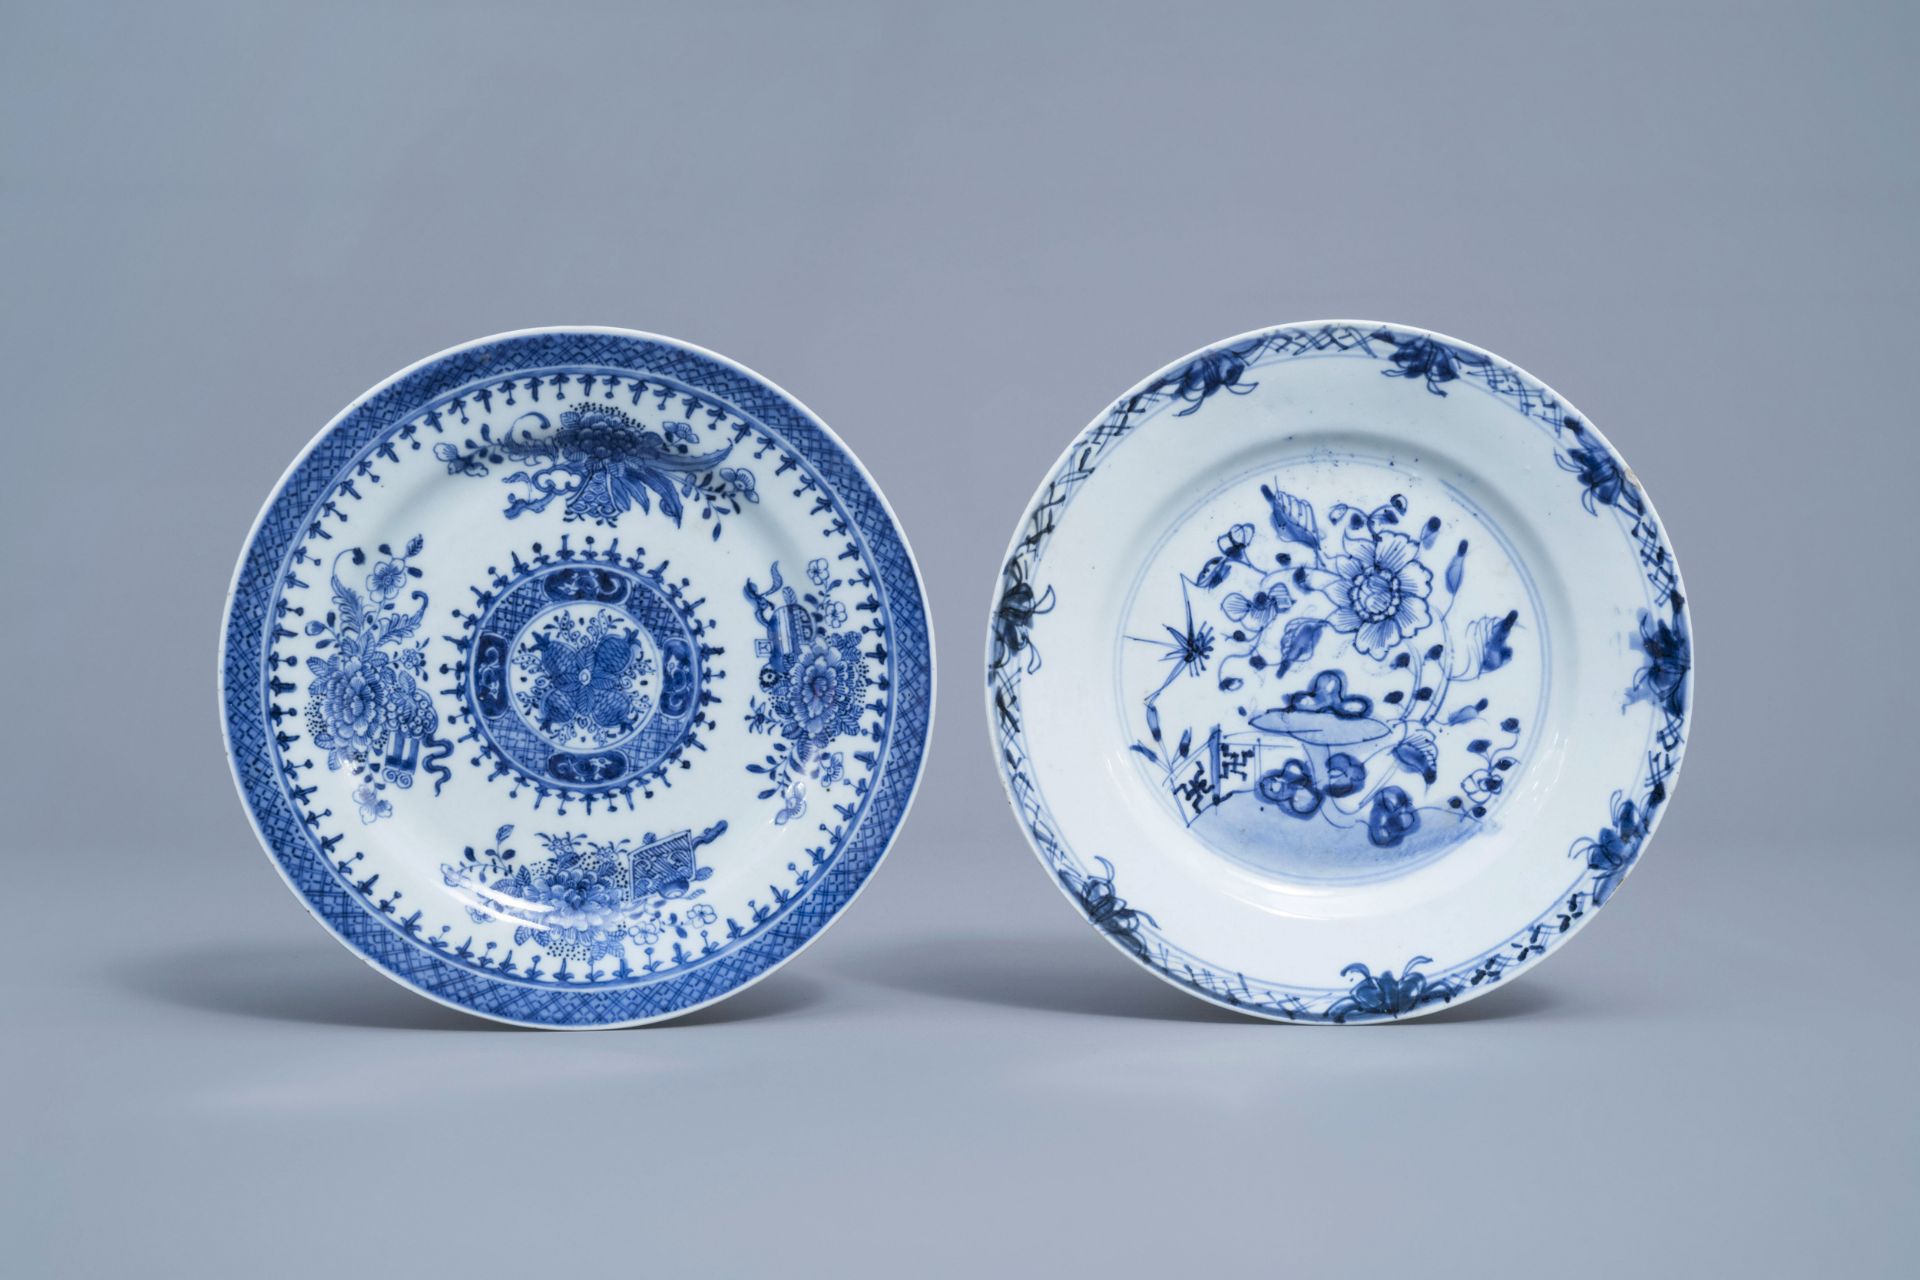 A varied collection of Chinese blue and white porcelain, 18th C. and later - Image 3 of 54